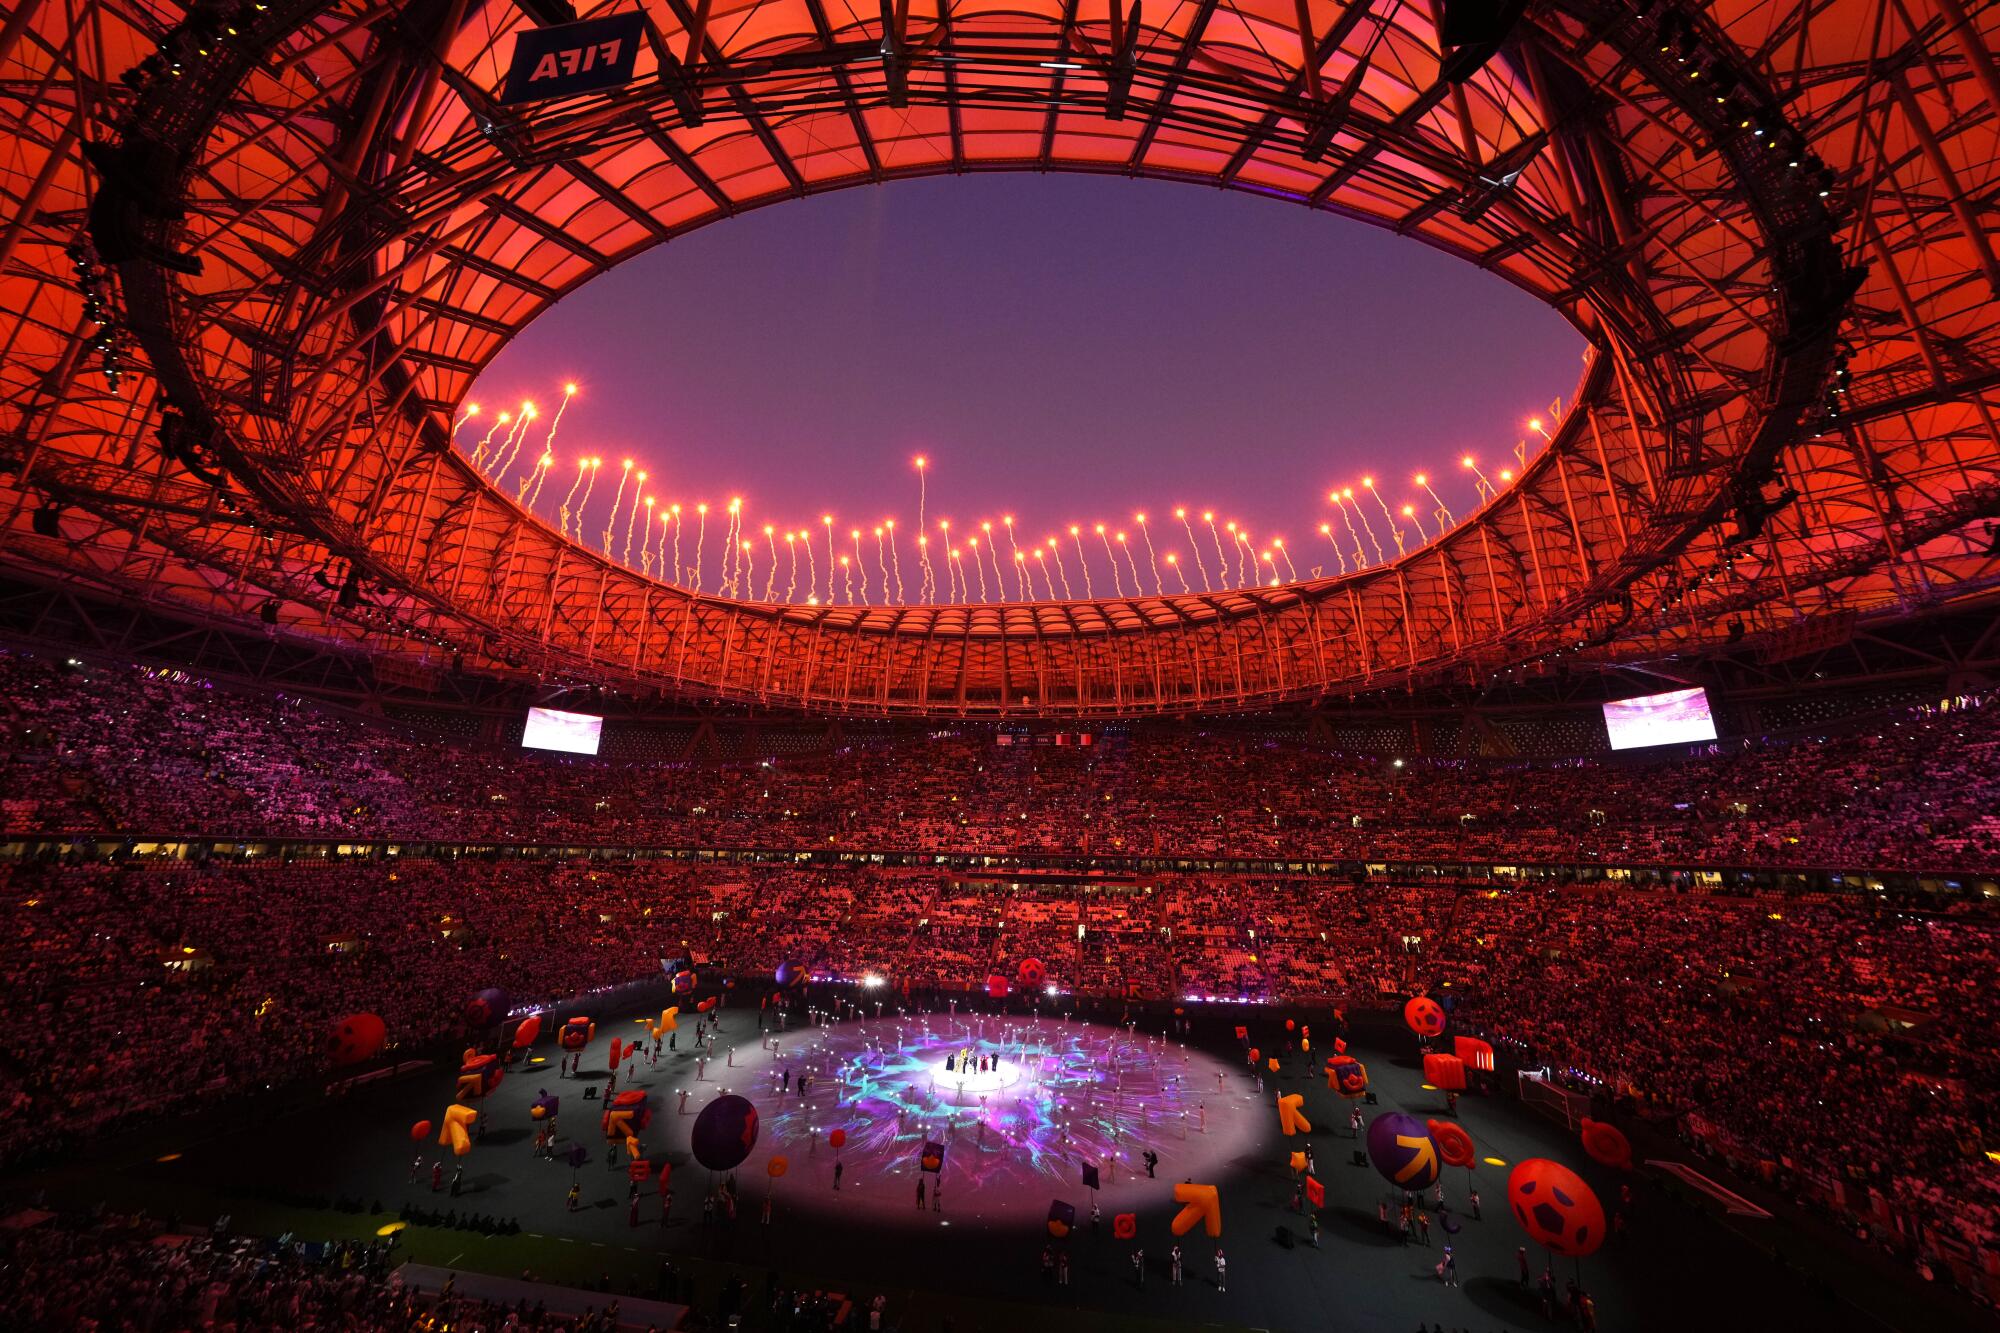 Fireworks explode above a red-lighted stadium as artists perform during the World Cup closing ceremony.